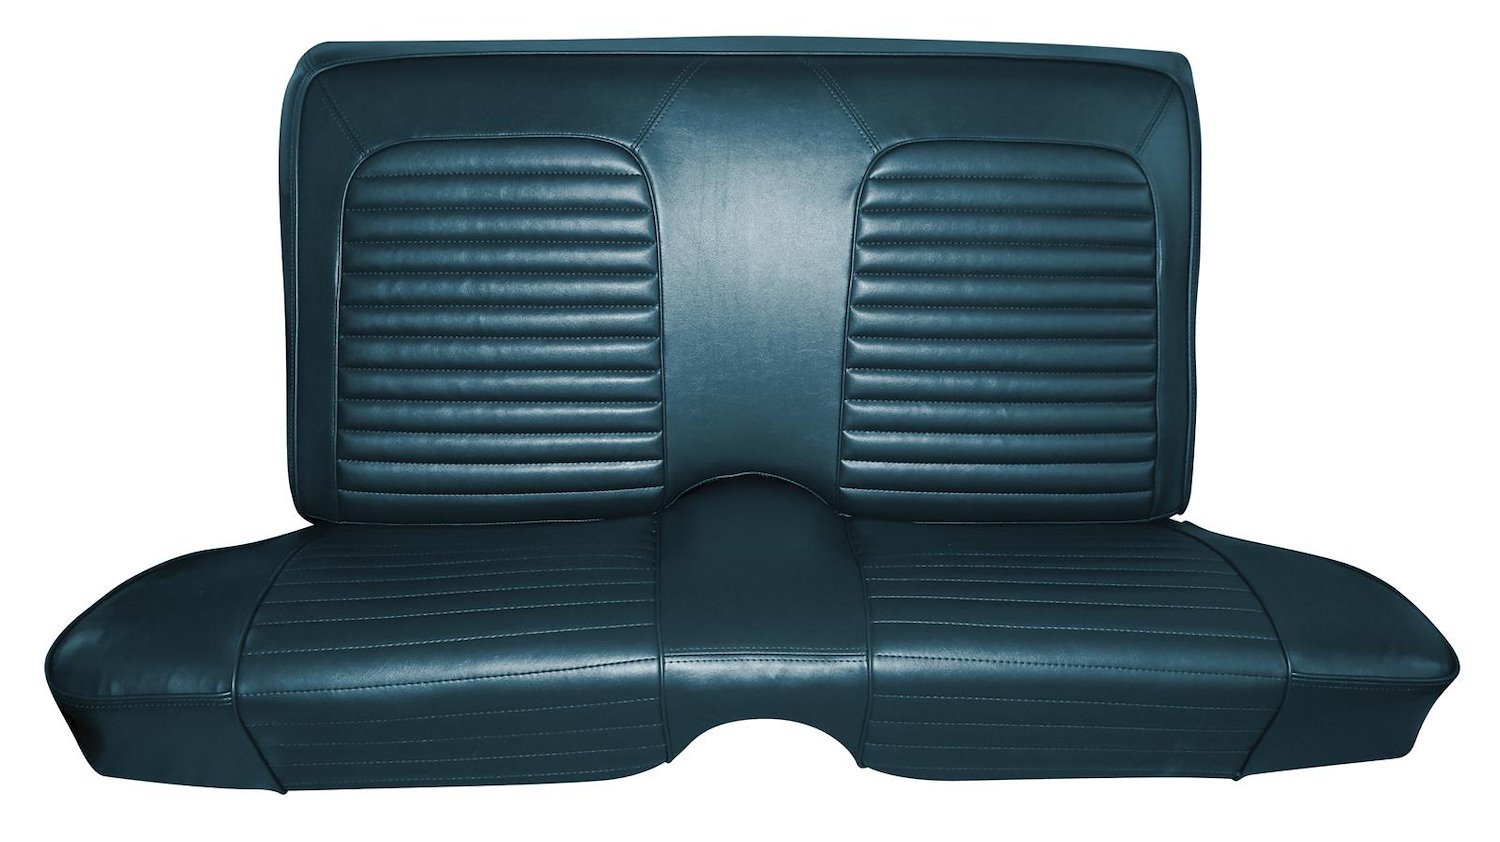 1971-1973 Mercury Cougar XR-7 Convertible Interior Rear Bench Seat Upholstery Set